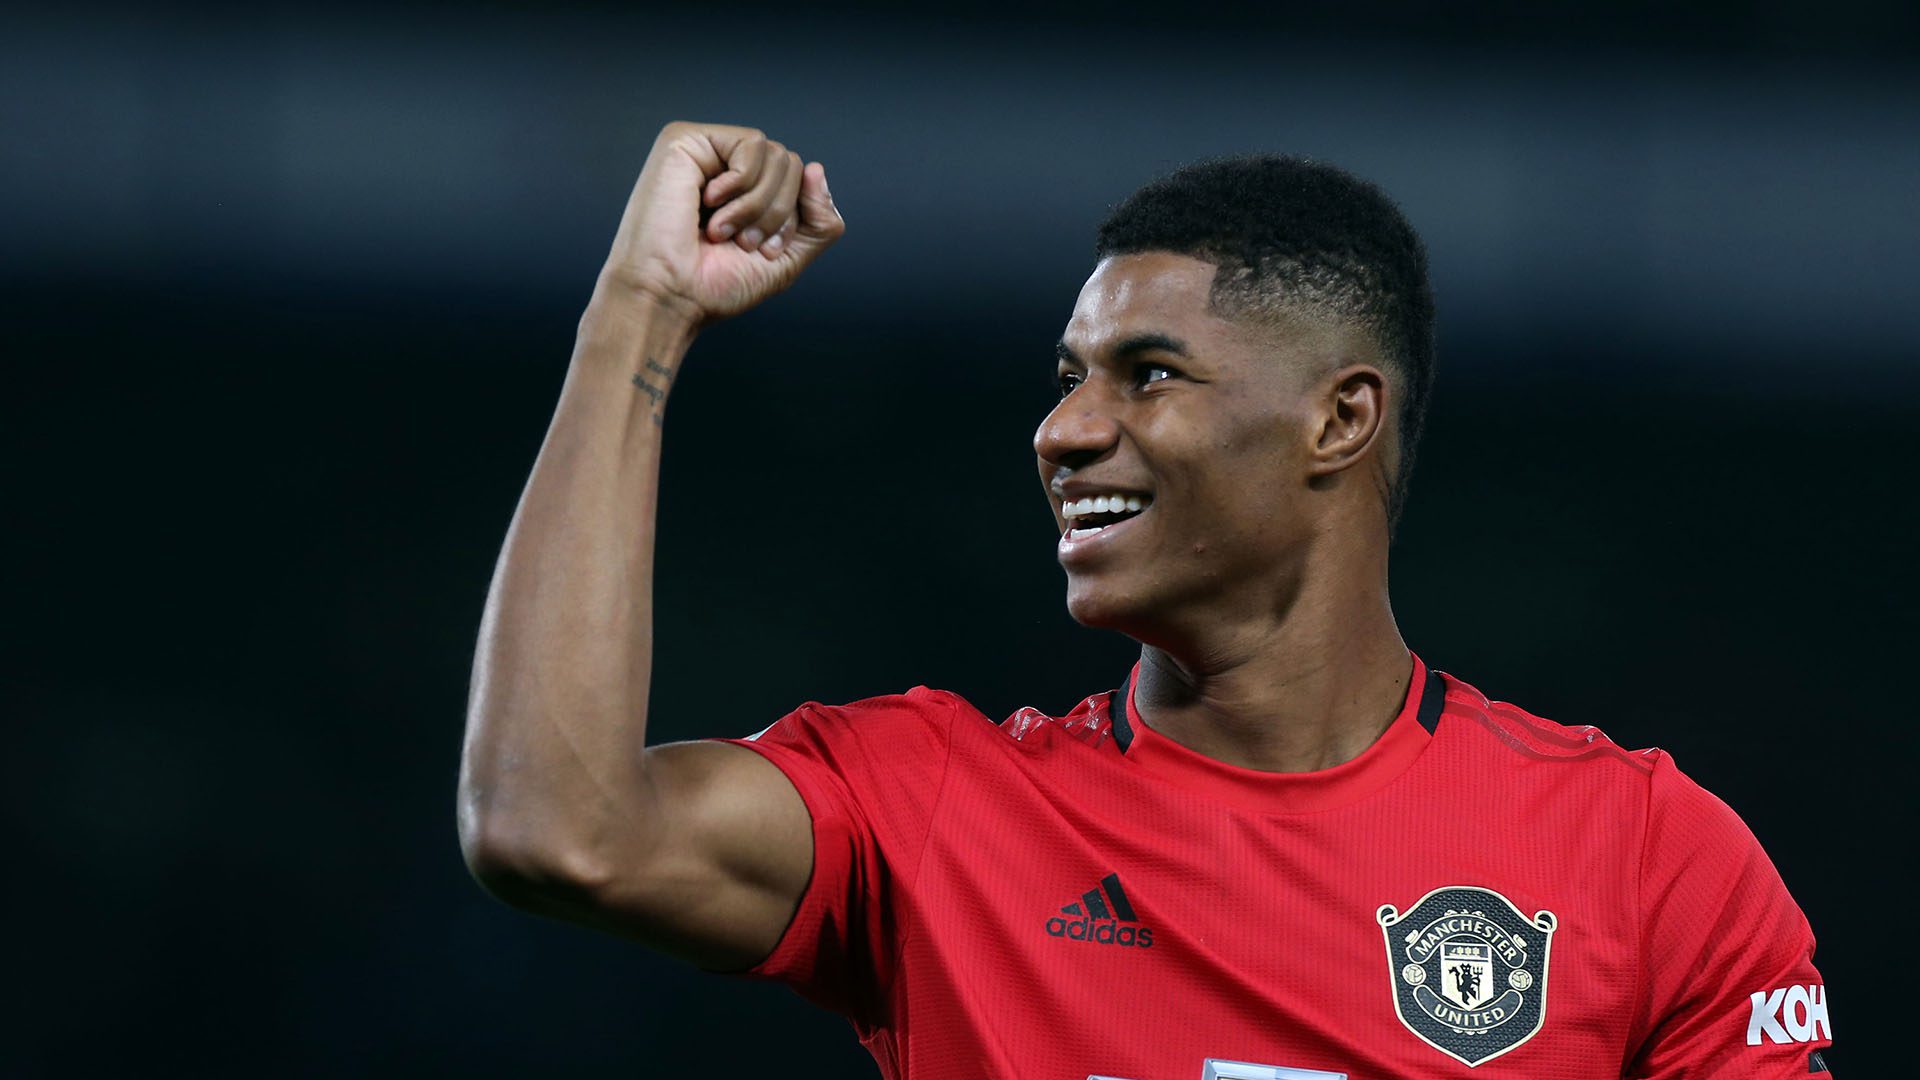 LONDON, ENGLAND - OCTOBER 30: Marcus Rashford of Manchester United celebrates after the Carabao Cup Round of 16 match between Chelsea FC and Manchester United at Stamford Bridge on October 30, 2019 in London, England. (Photo by Matthew Peters/Manchester United via Getty Images)